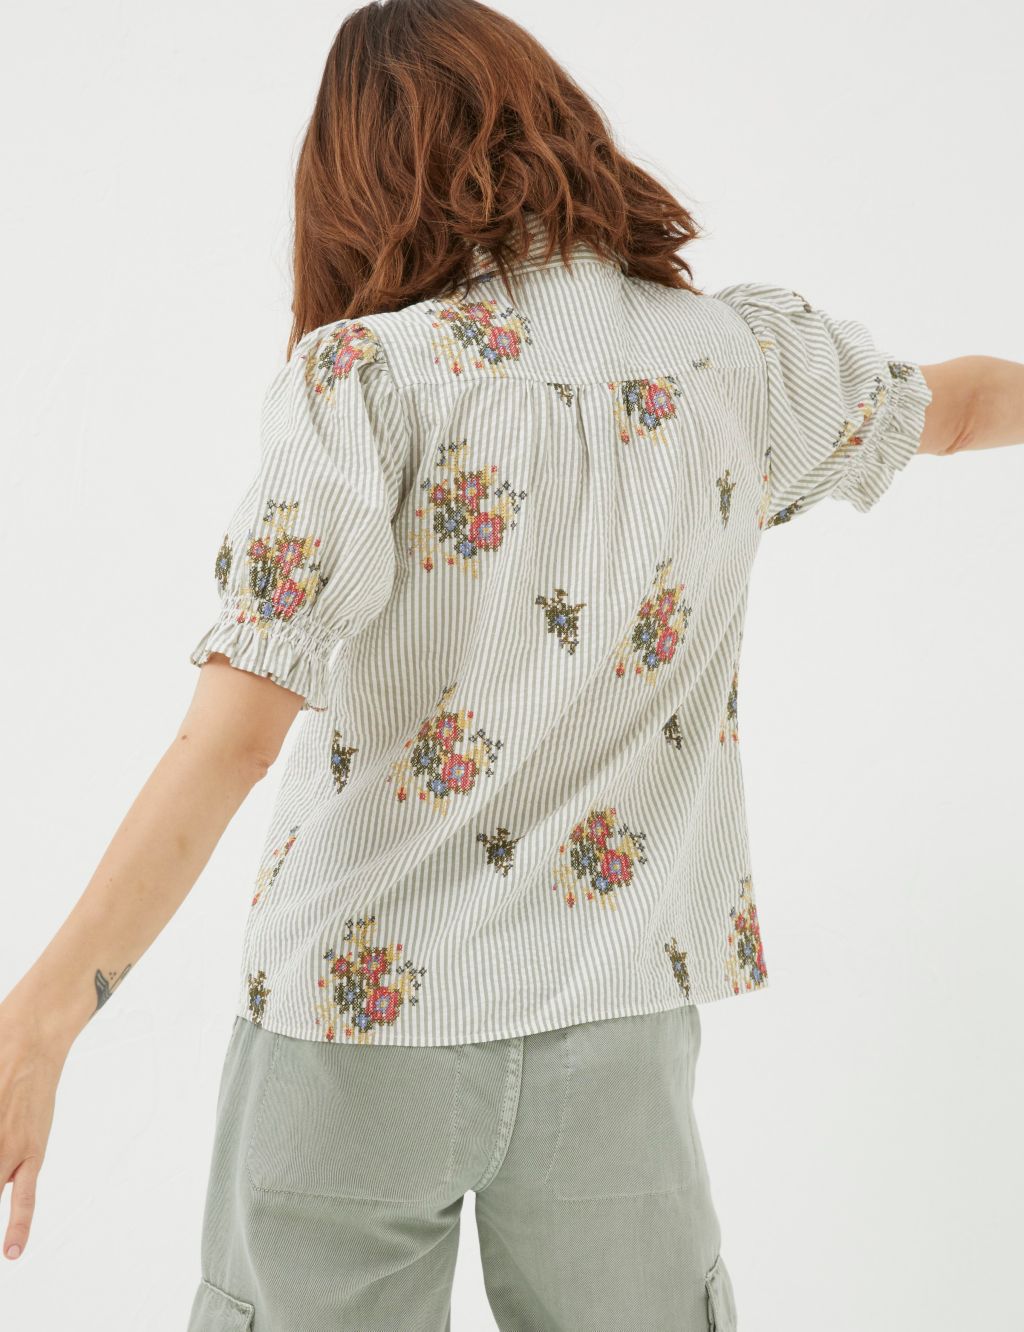 Pure Cotton Striped Floral Embroidery Shirt image 3